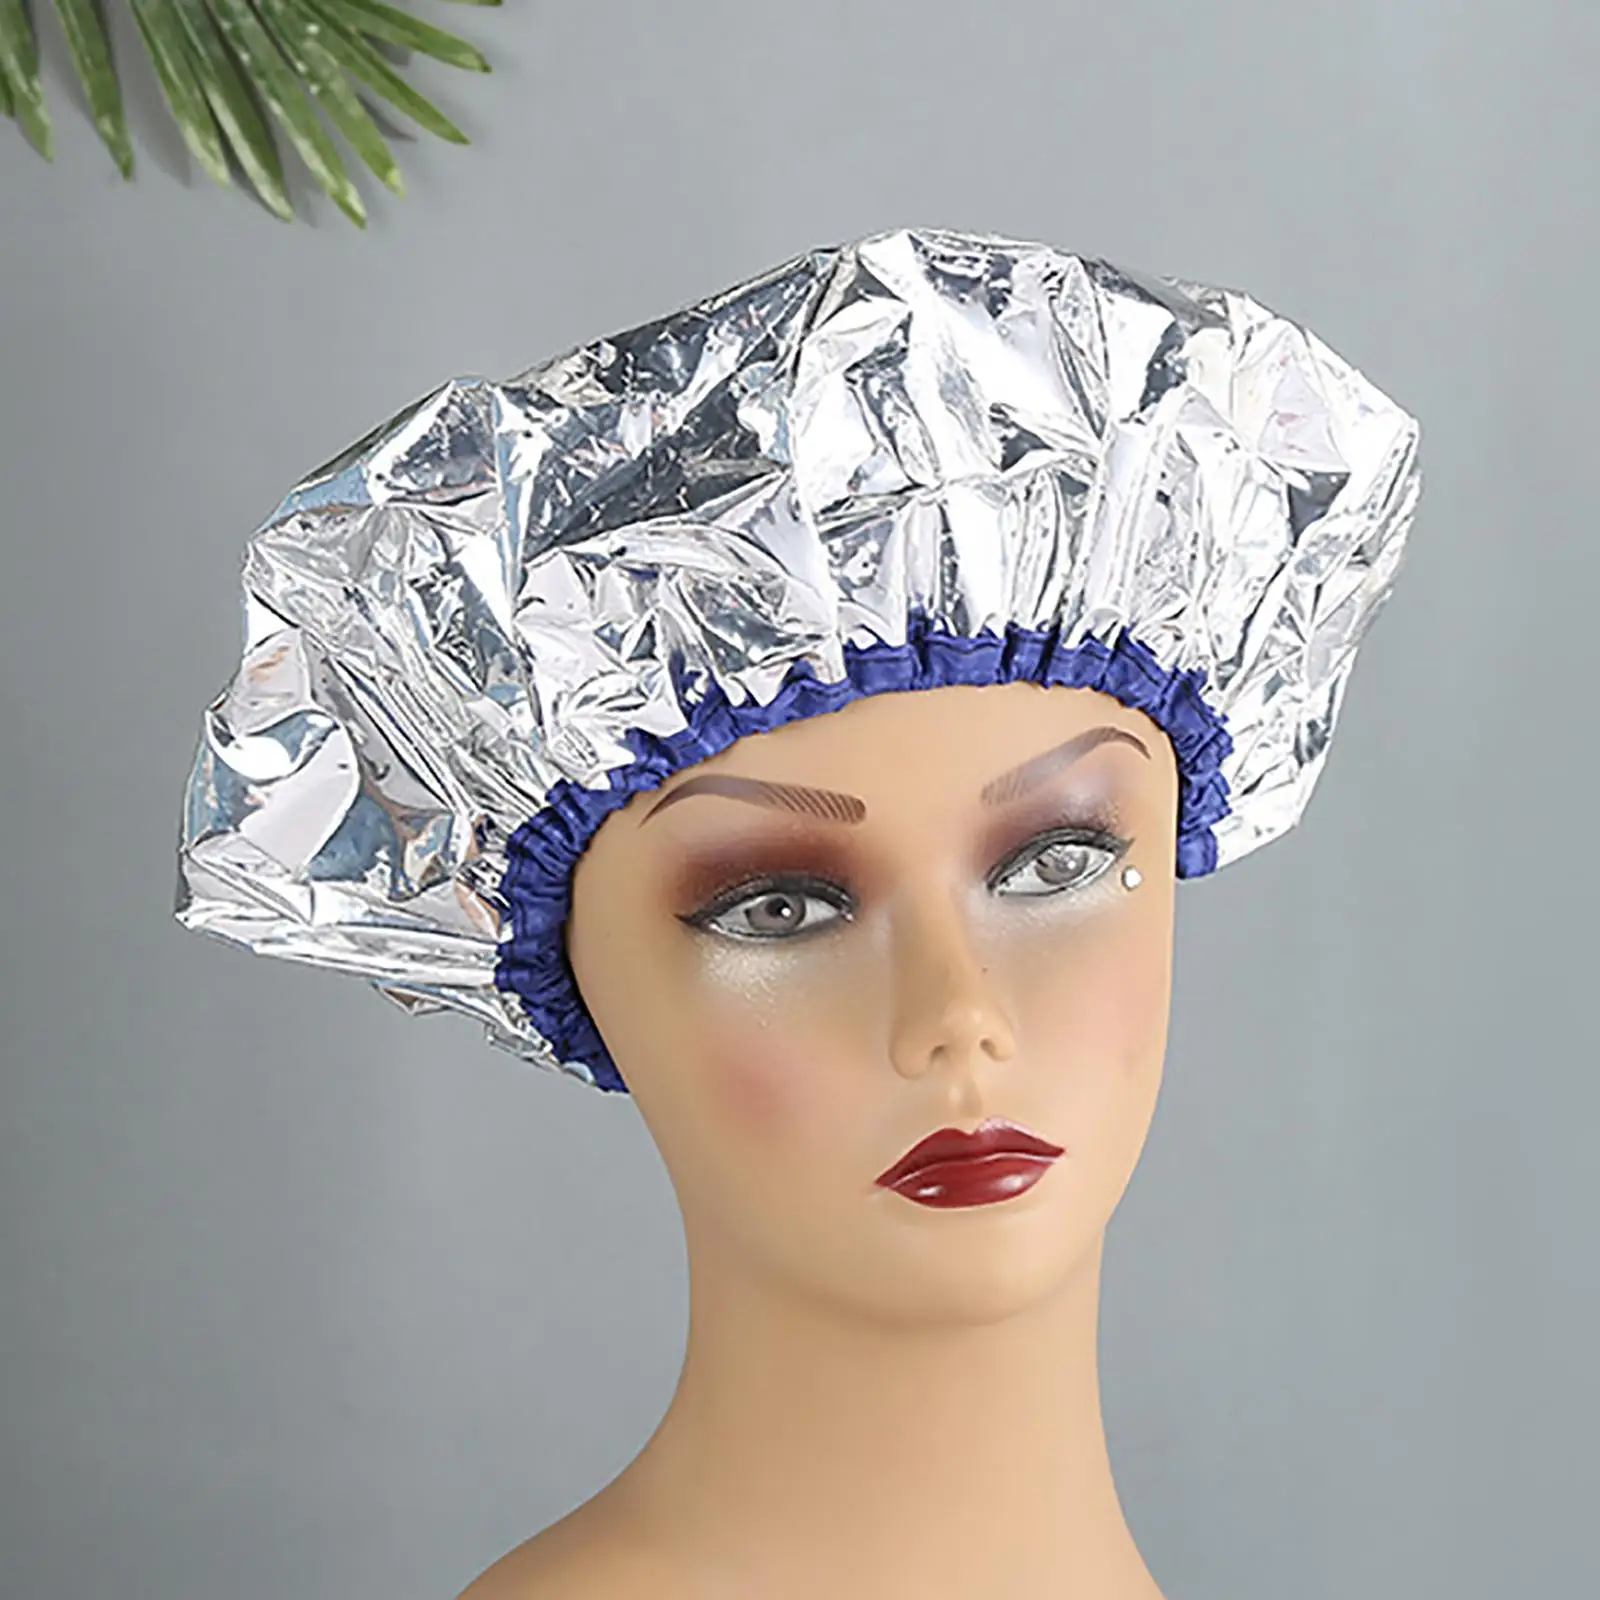 10 Pieces Heat Insulation Tin Foil Hat Professional Deep Conditioning Waterproof Elastic Shower Caps for Home Hair Salon Women